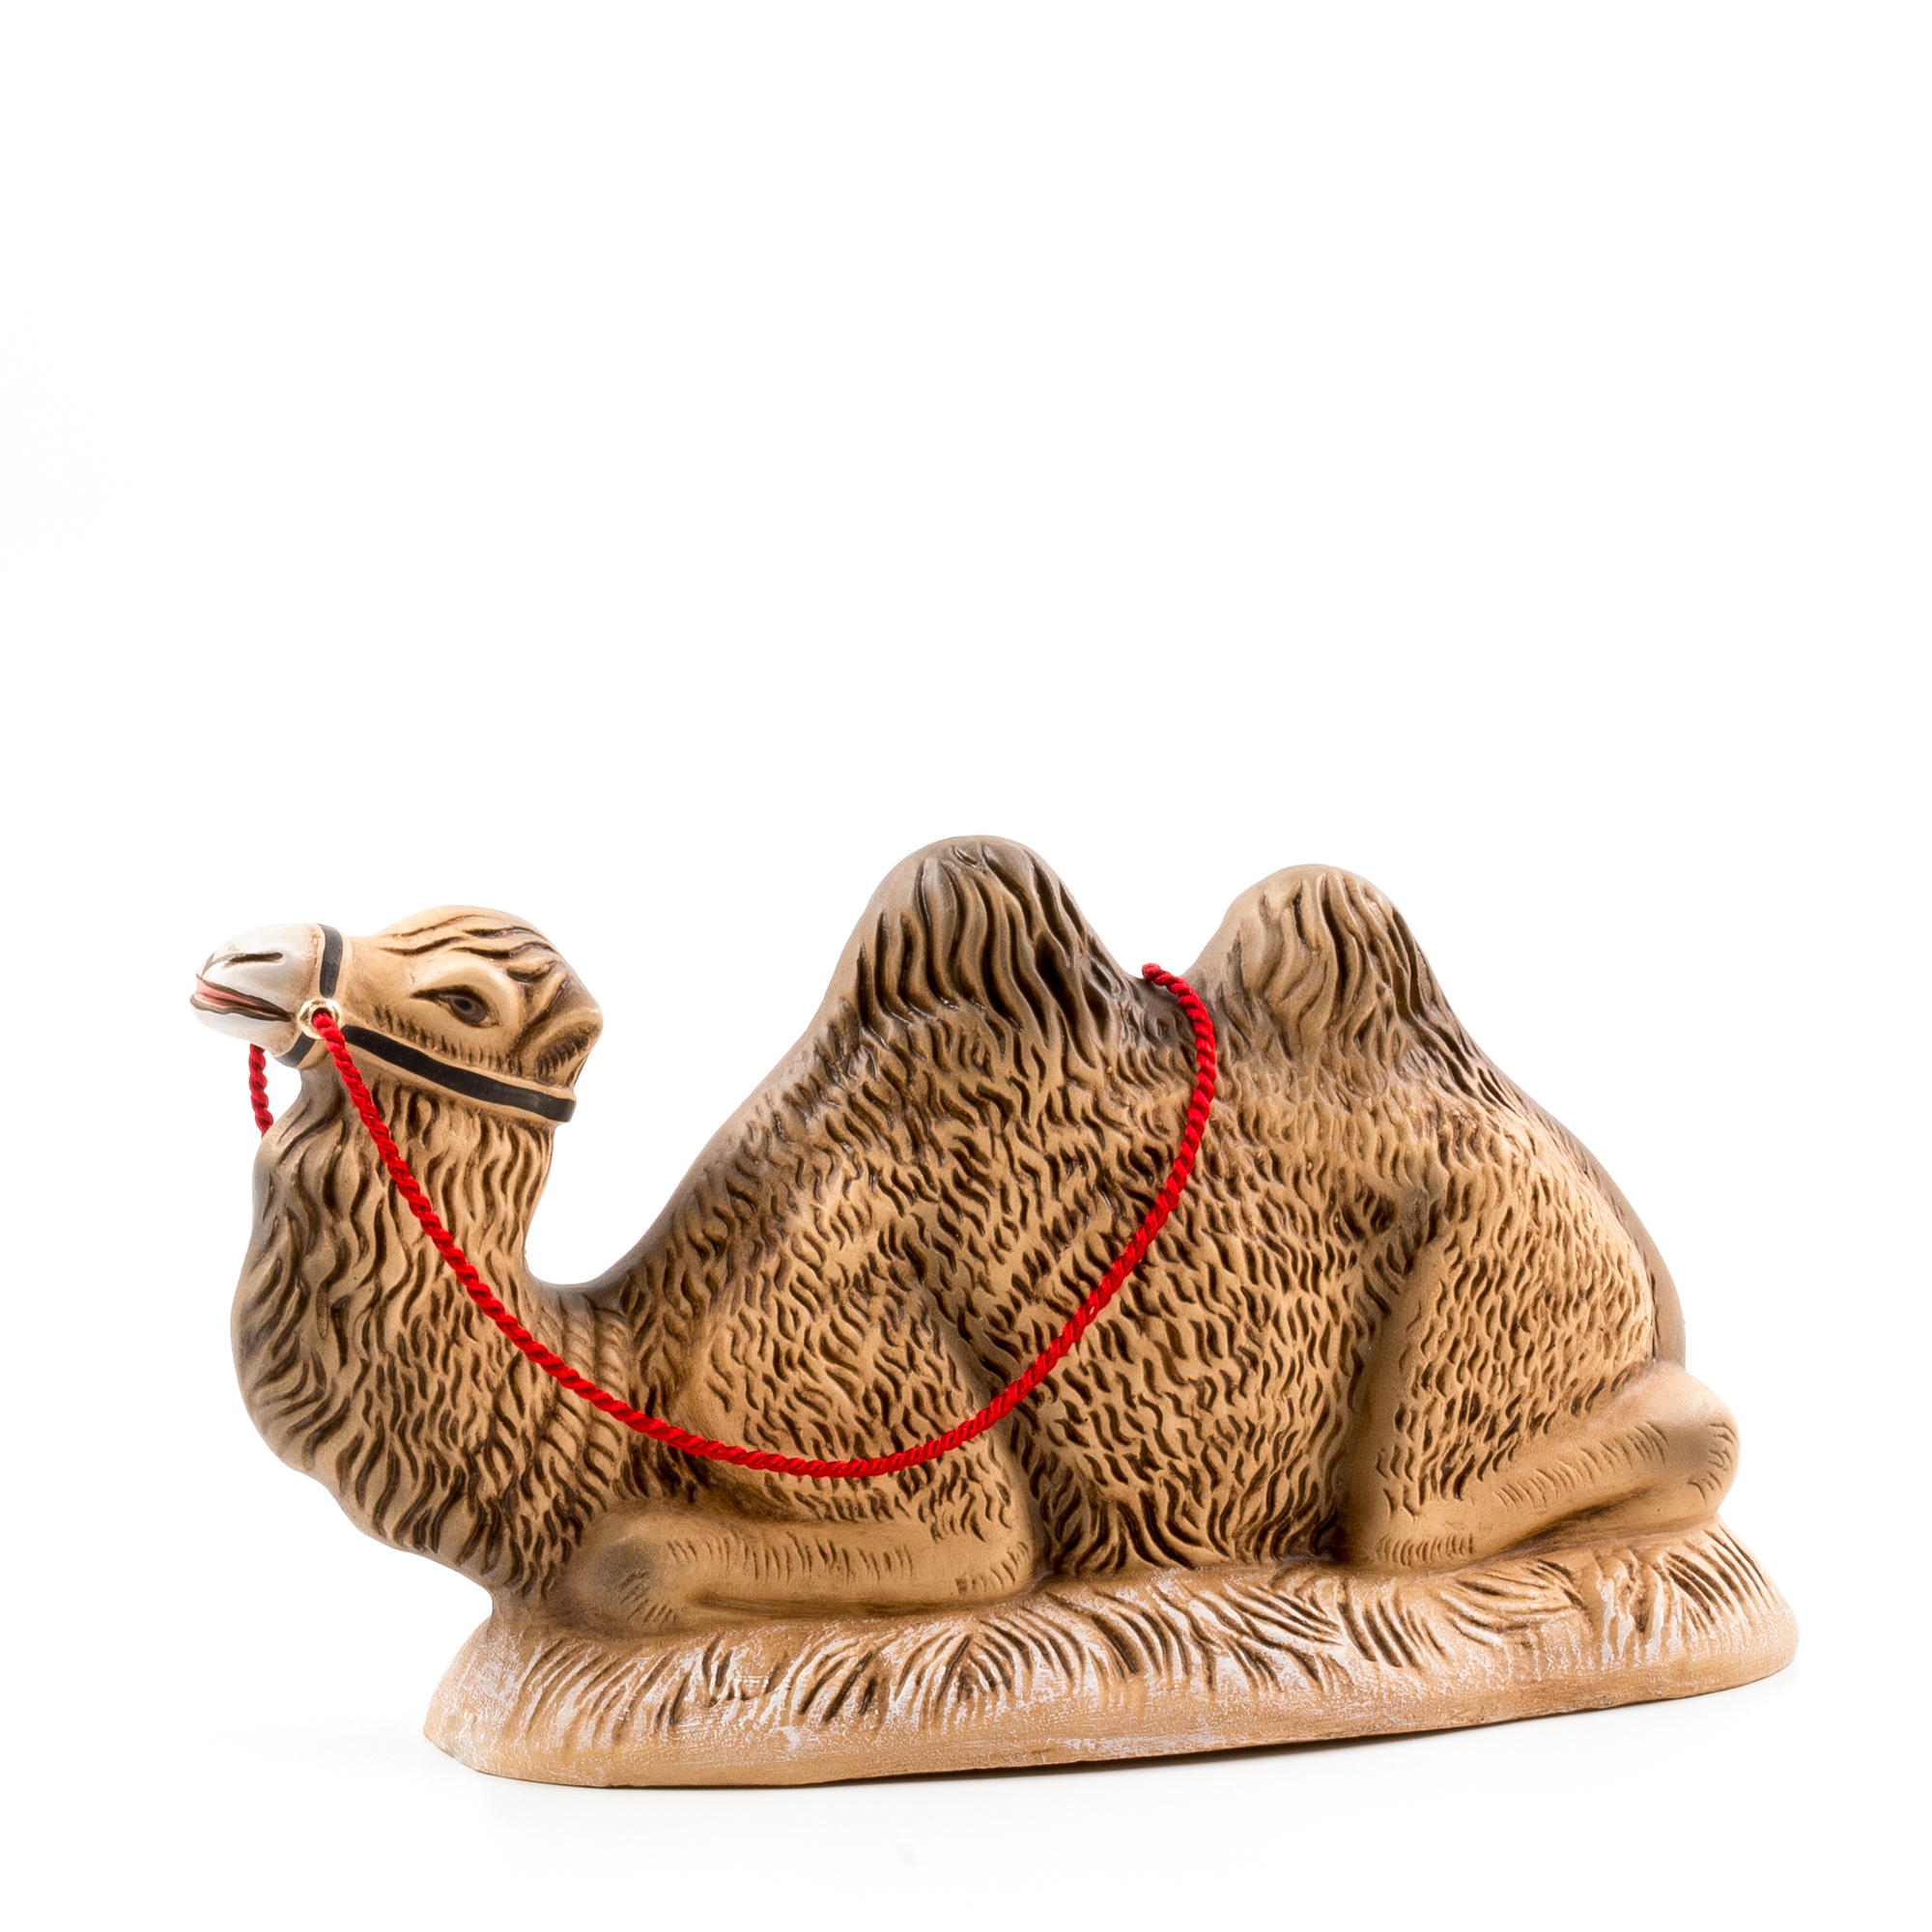 Lying camel, to 6.75 in. figures